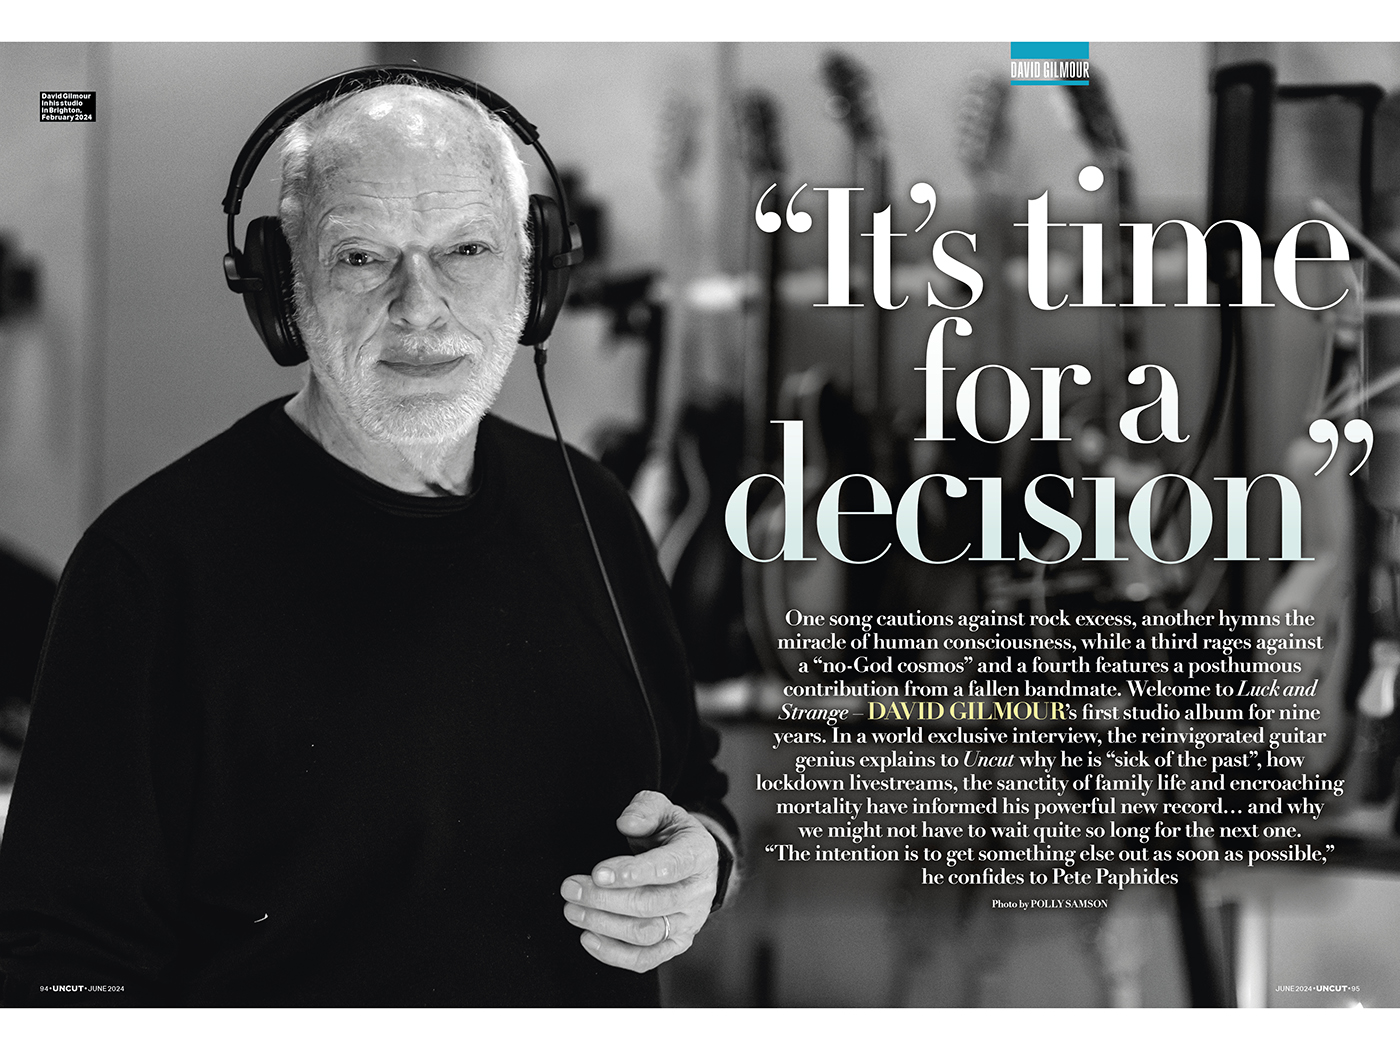 David Gilmour interviewed: "There was no pious false respect"